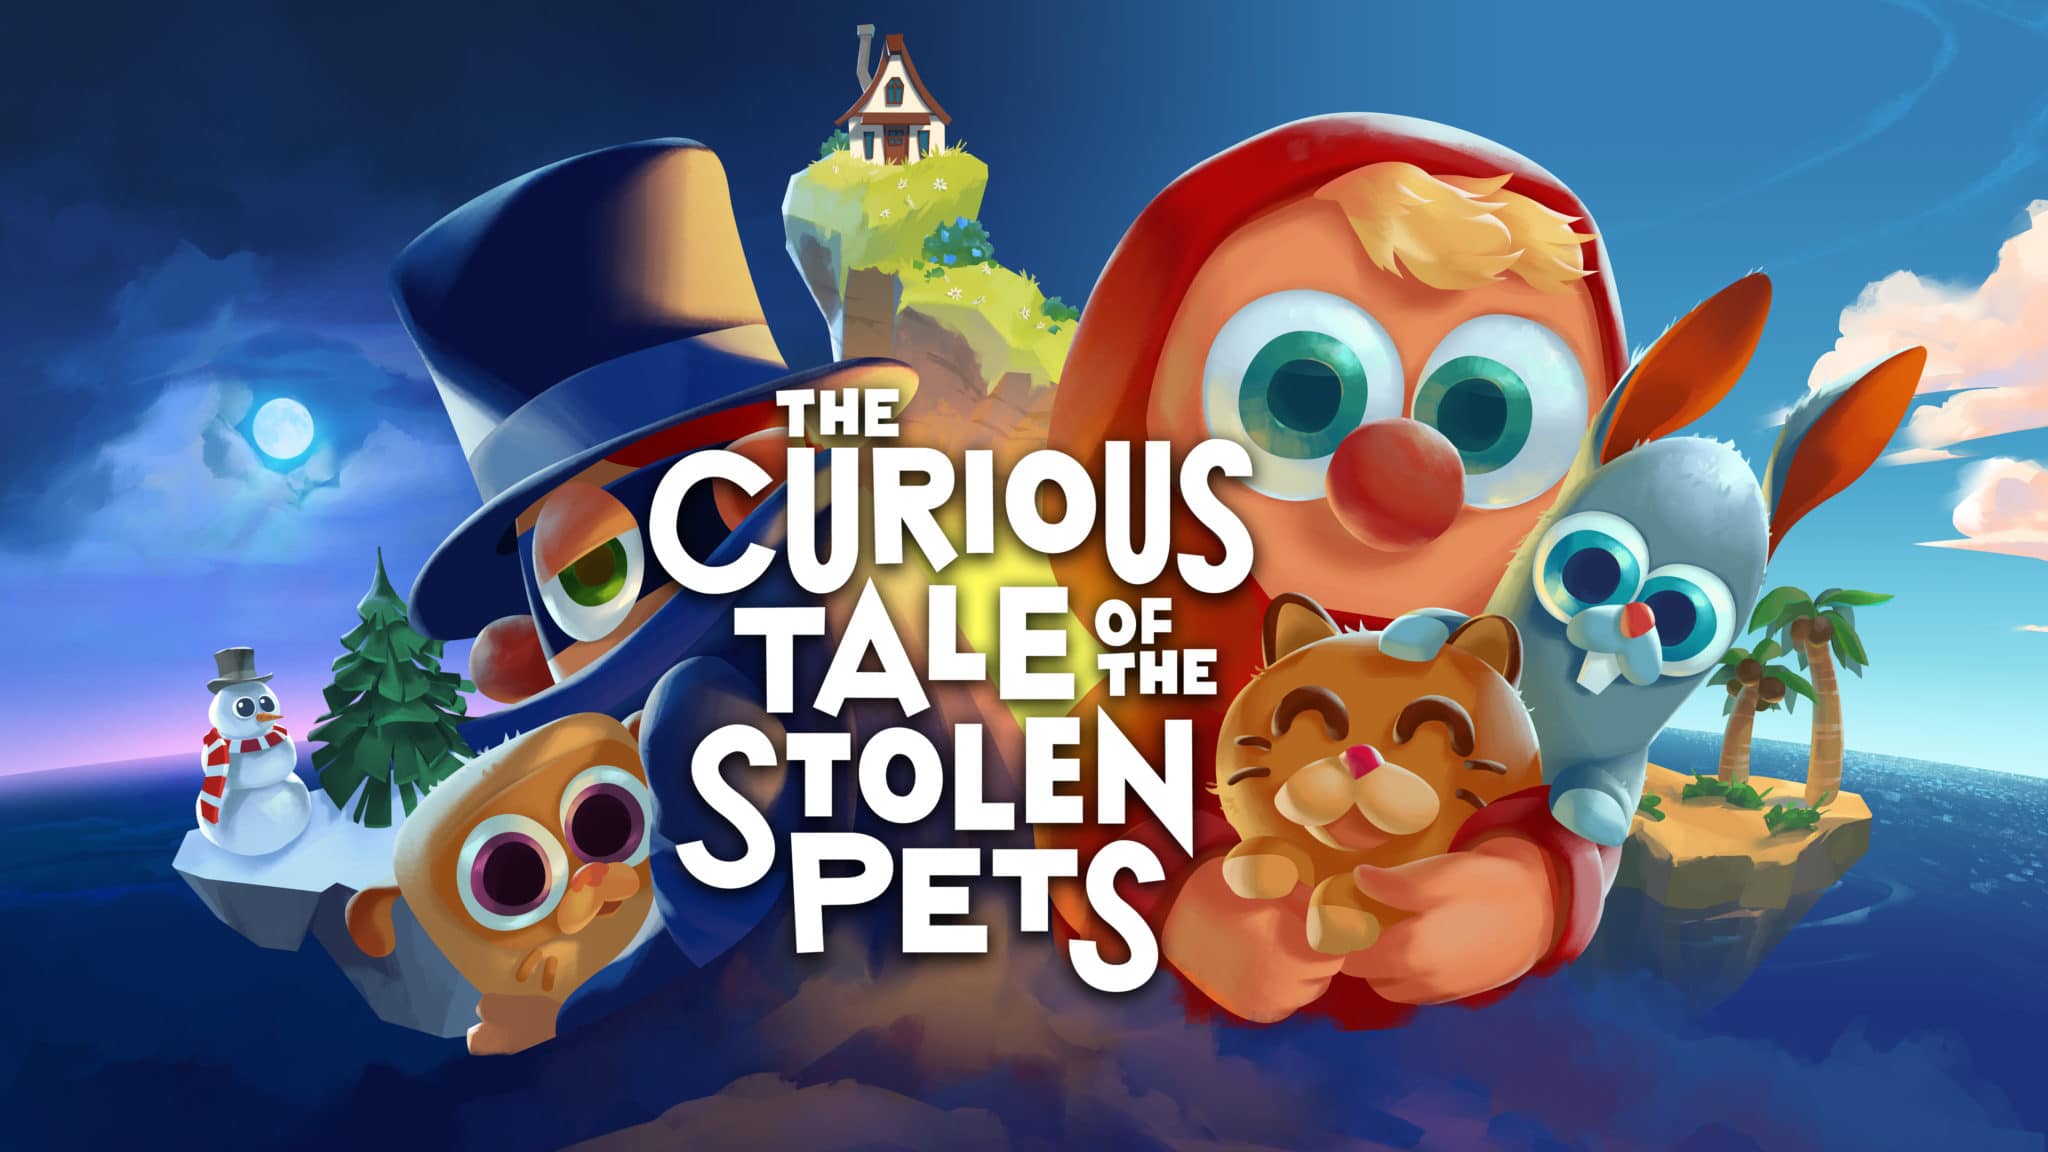 Presentato The Curious Tale of the Stolen Pets 2